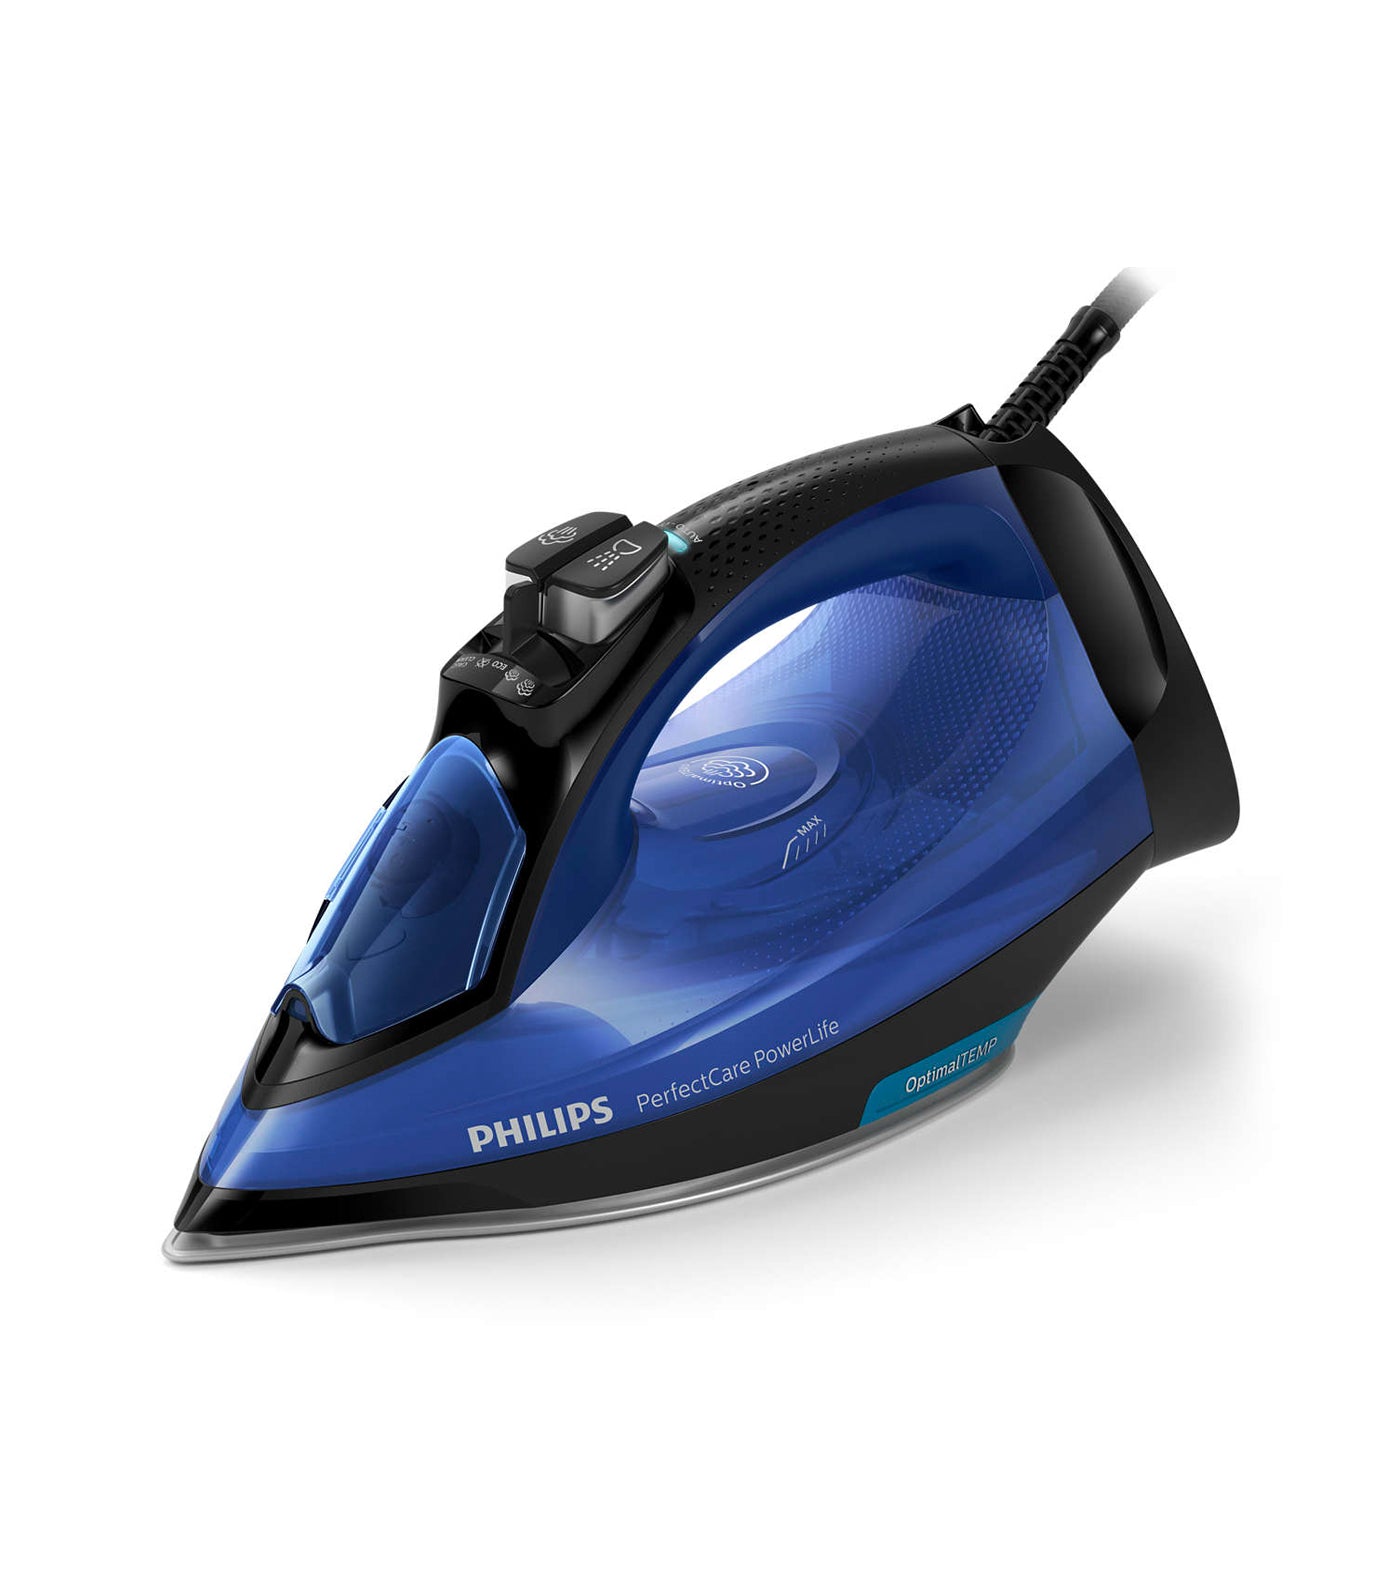 Philips Perfect Care Steam Iron in Blue Black